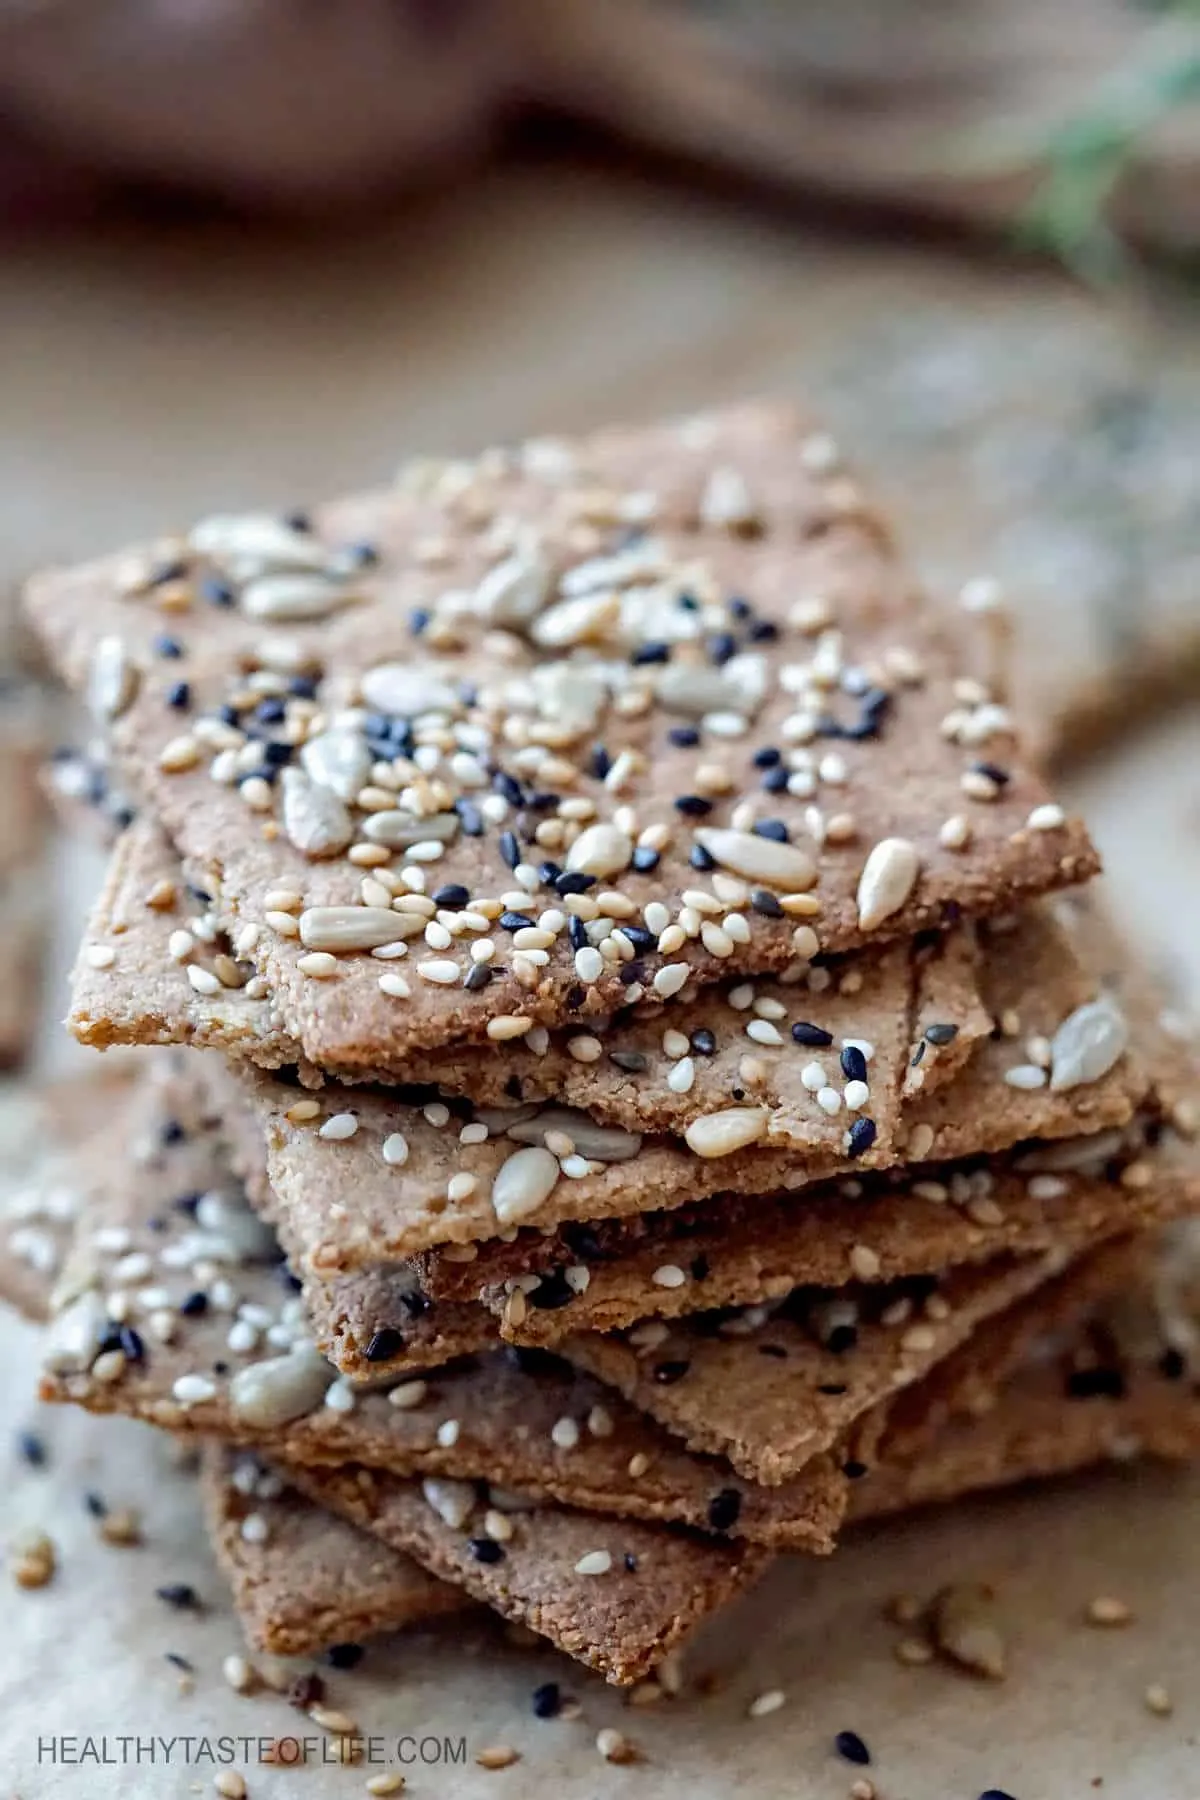 Keto crackers recipe without cheese. These homemade keto low carb crackers are made with healthy fats, a variety of seeds and grain free flour (tigernut or almond flour). These keto crackers recipe is also vegan (dairy free) and easy to make. #keto #crakers #lowcarb #seedcrackers #ketocrackers #vegan